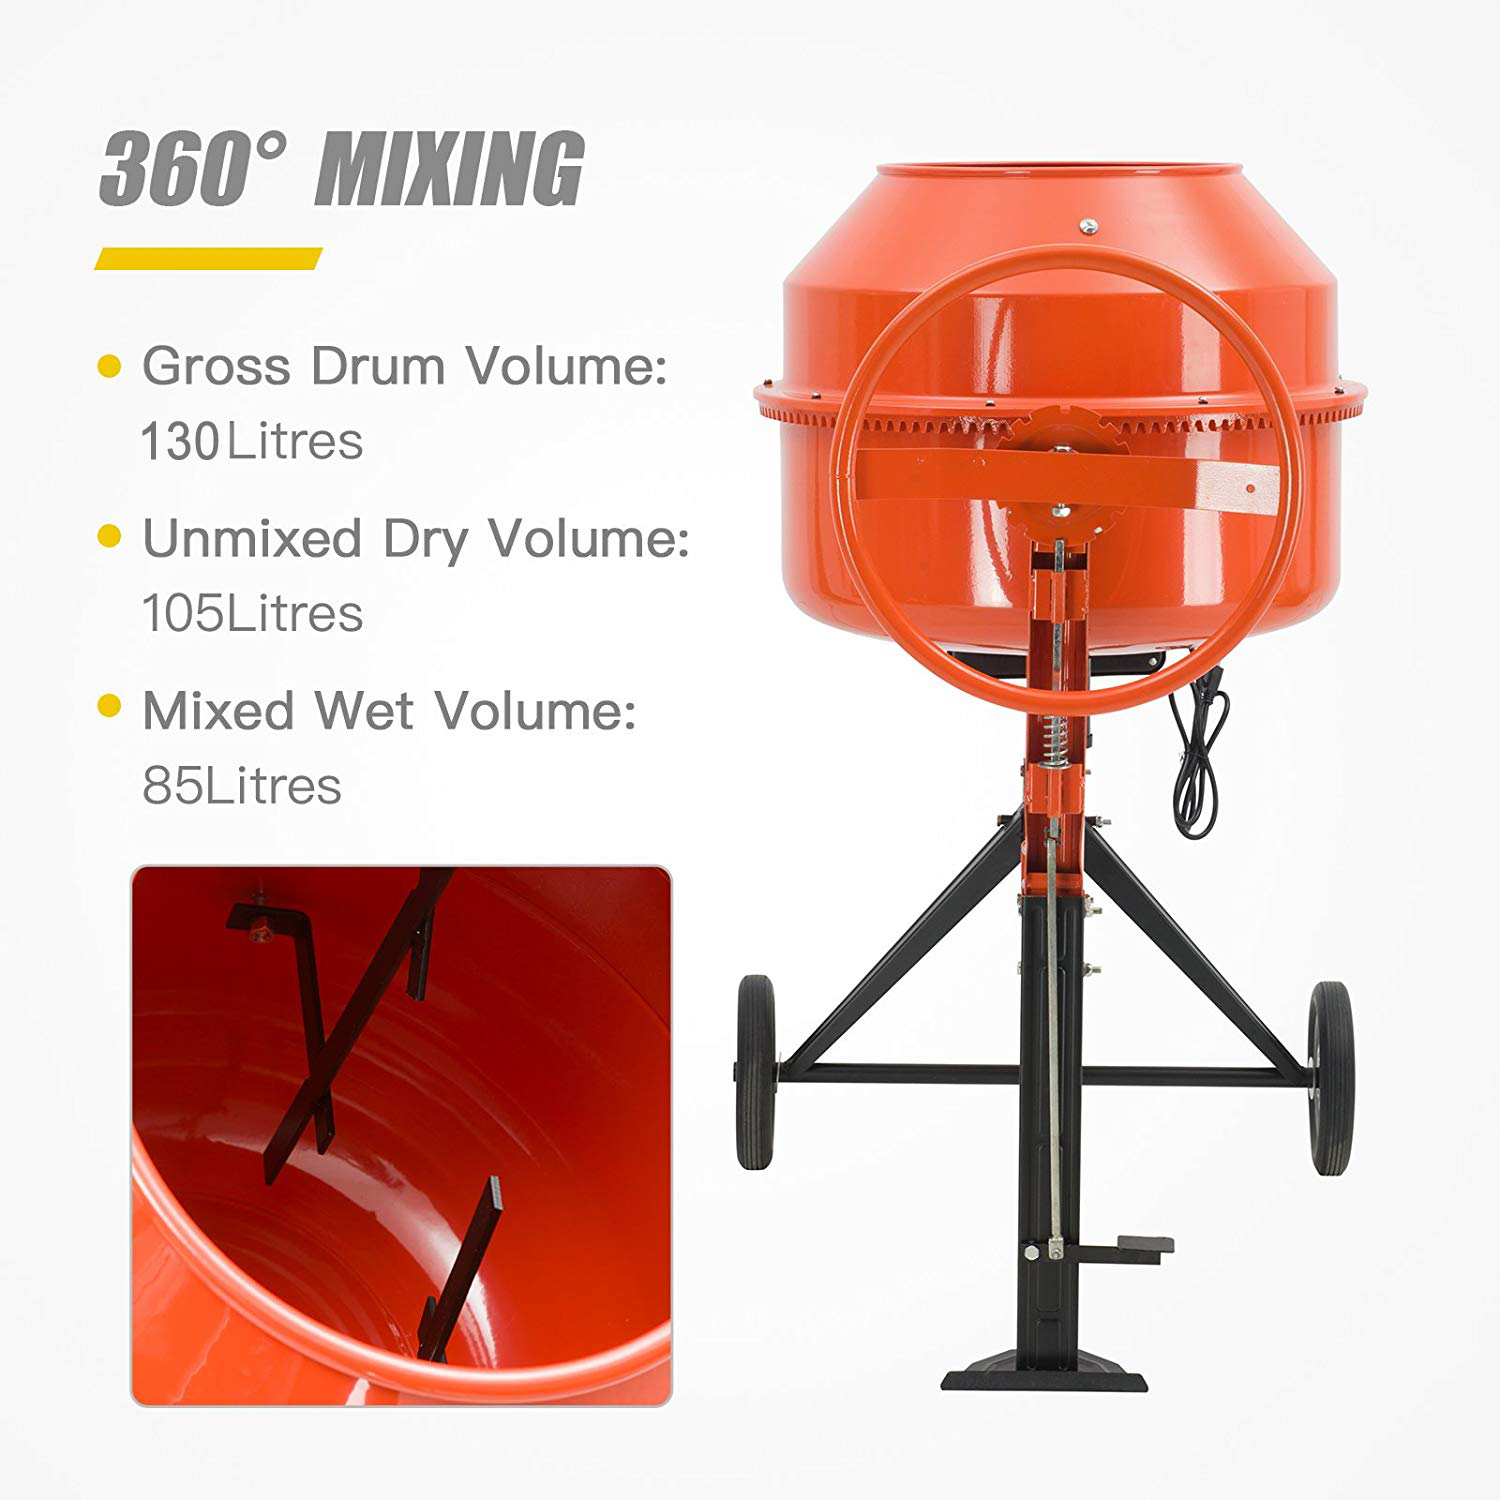 South Africa 600w Portable electric cement concrete mixer machine suppliers